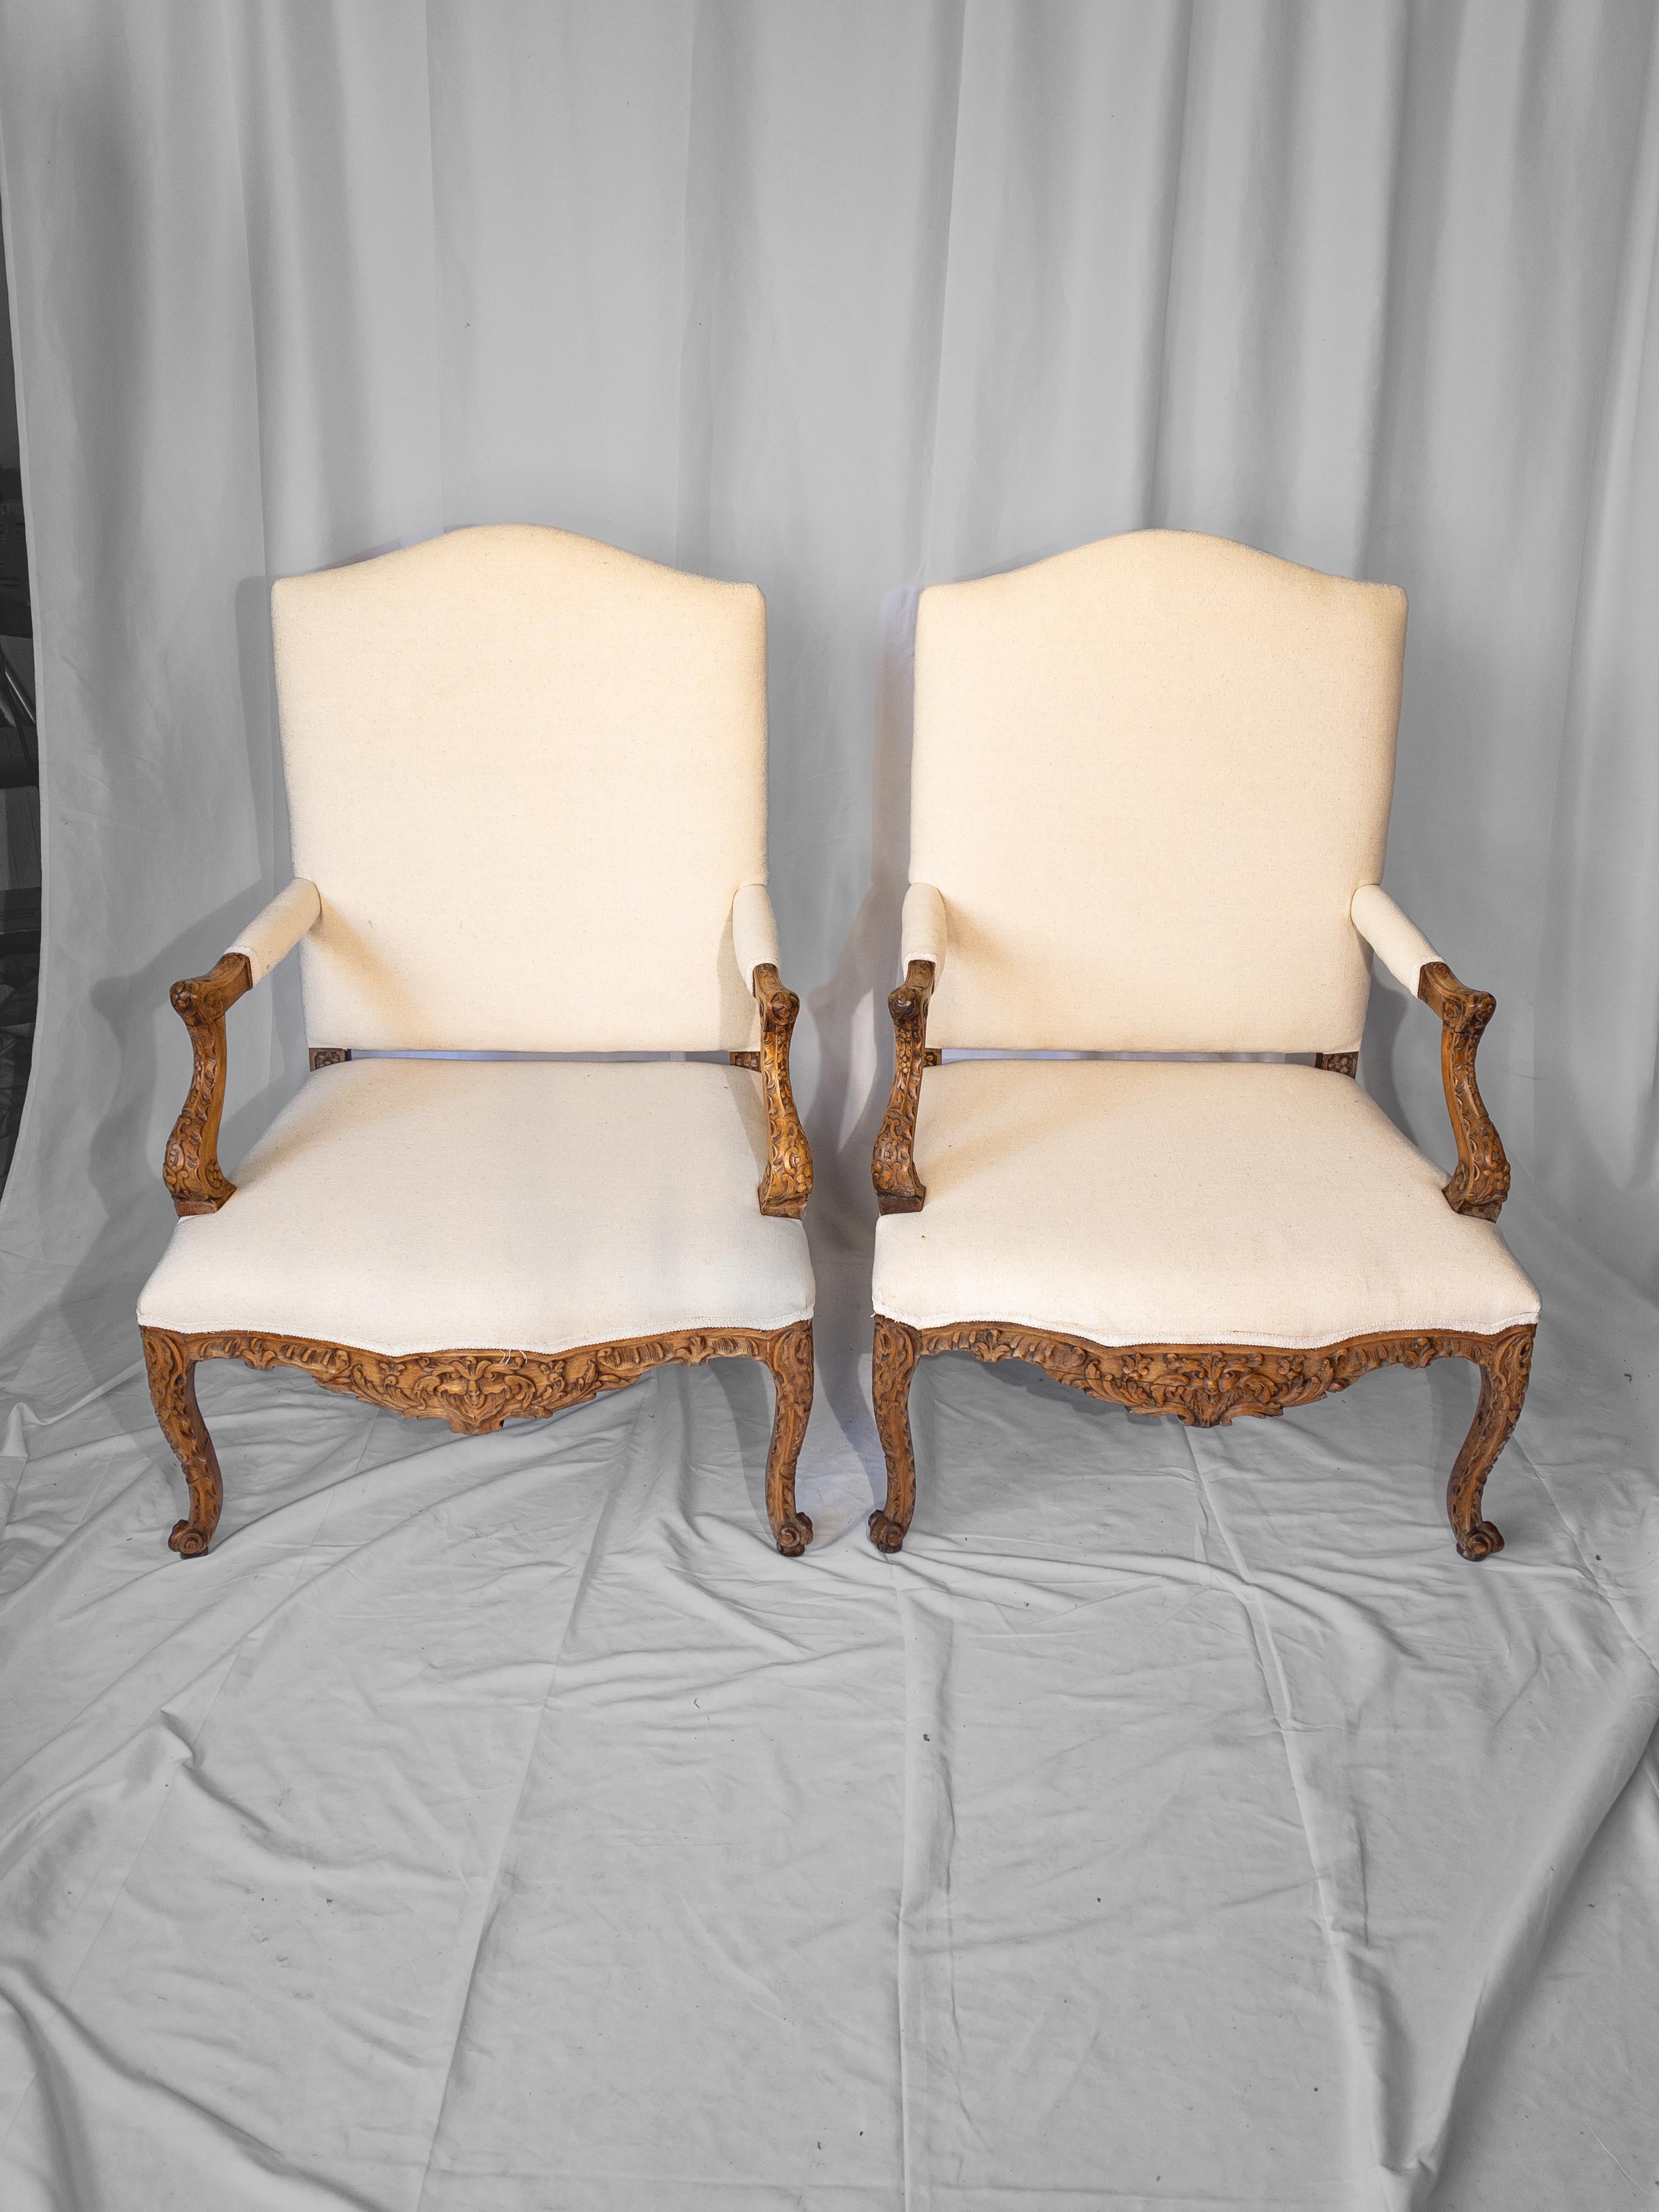 Indulge in the timeless elegance of this pair of 19th-century French Louis XV Style Carved Wooden Arm Chairs, a testament to the grace and beauty of the era. Crafted with meticulous attention to detail, these chairs feature exquisite hand-carved